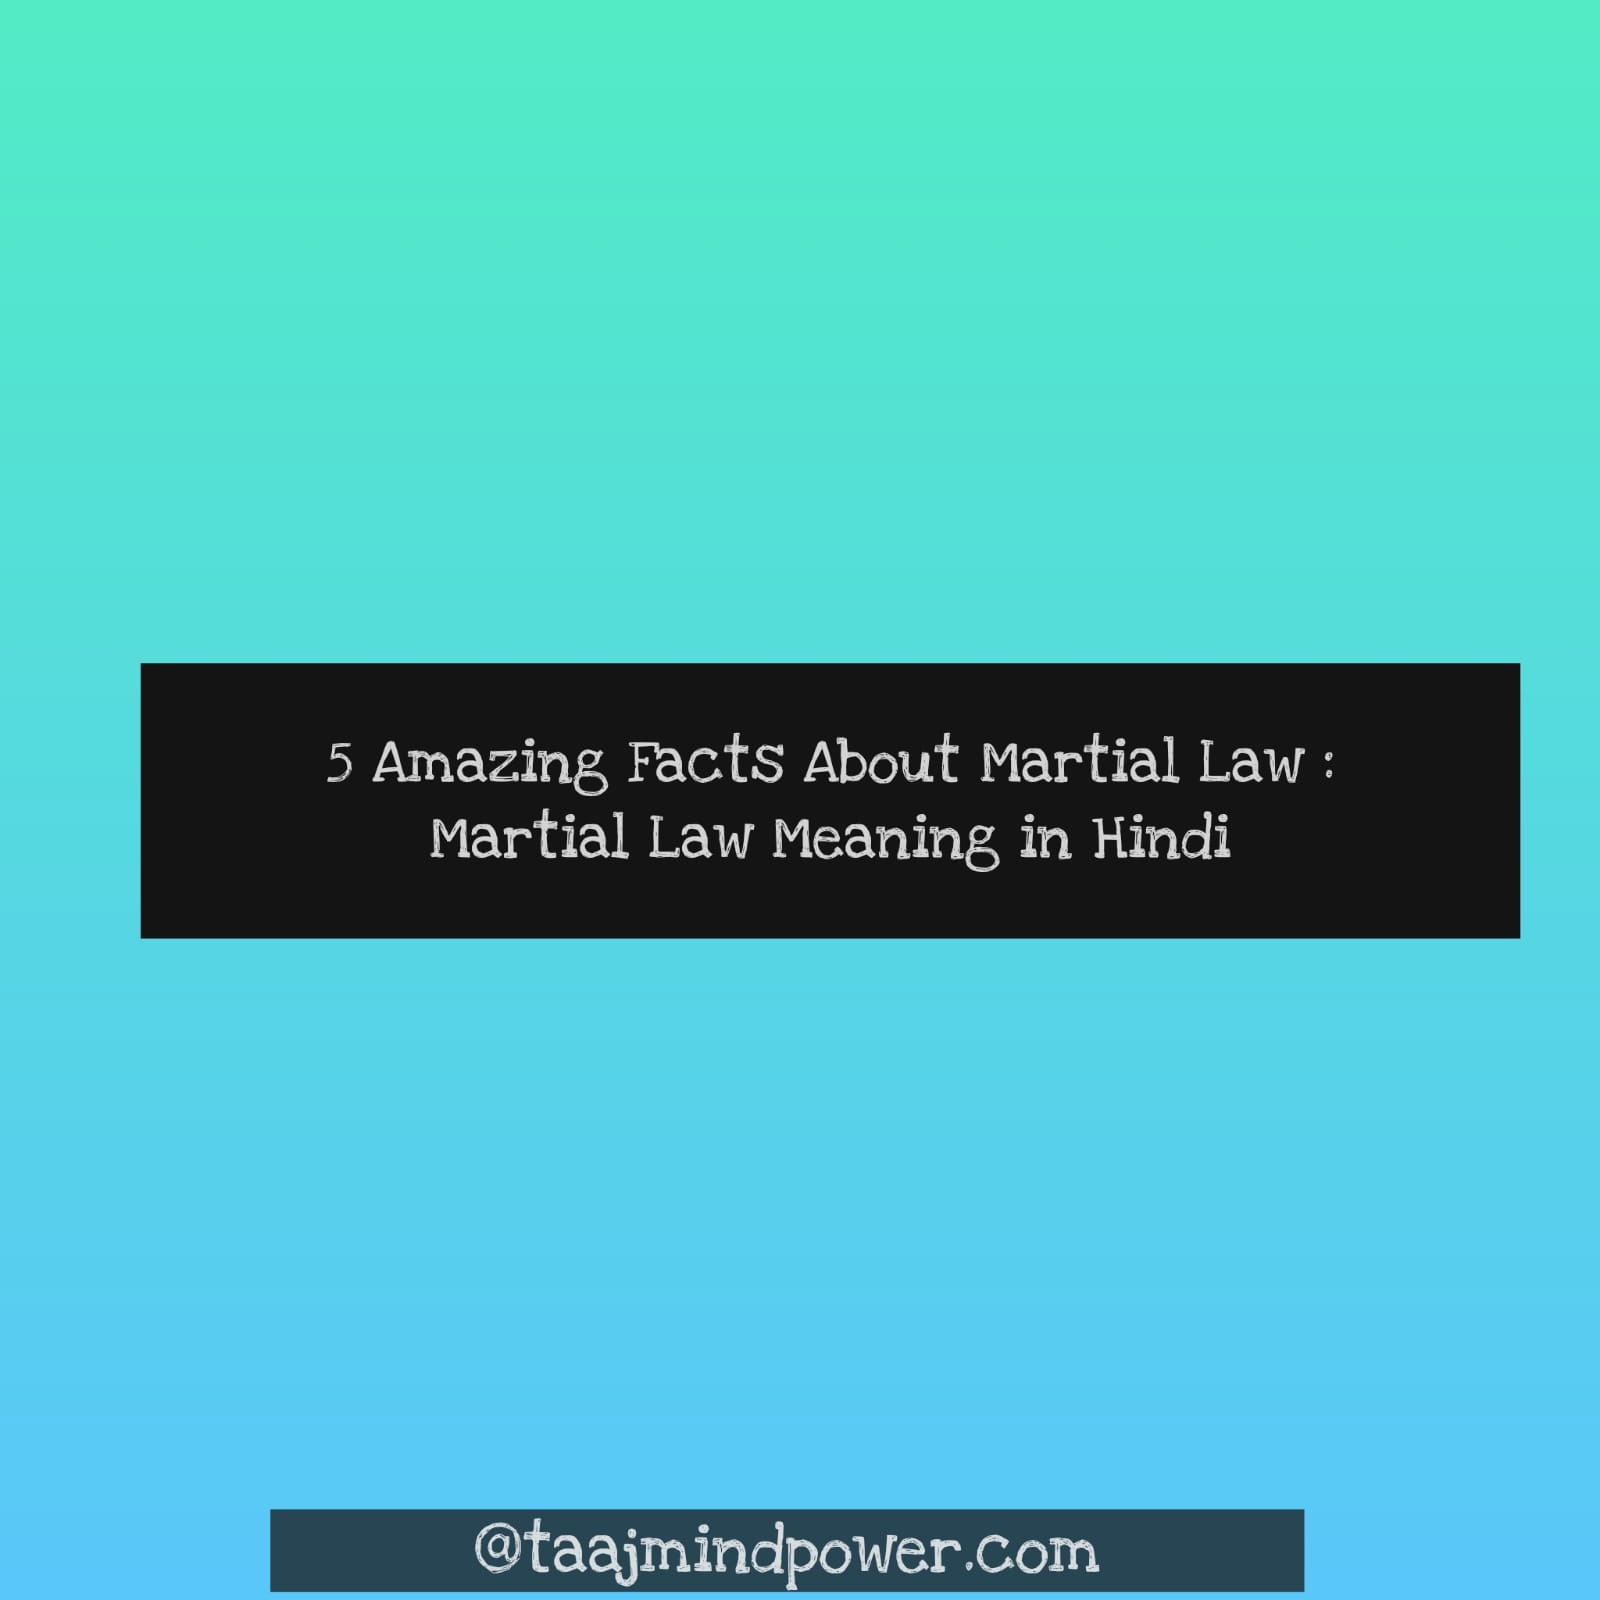 Martial Law Meaning in Hindi